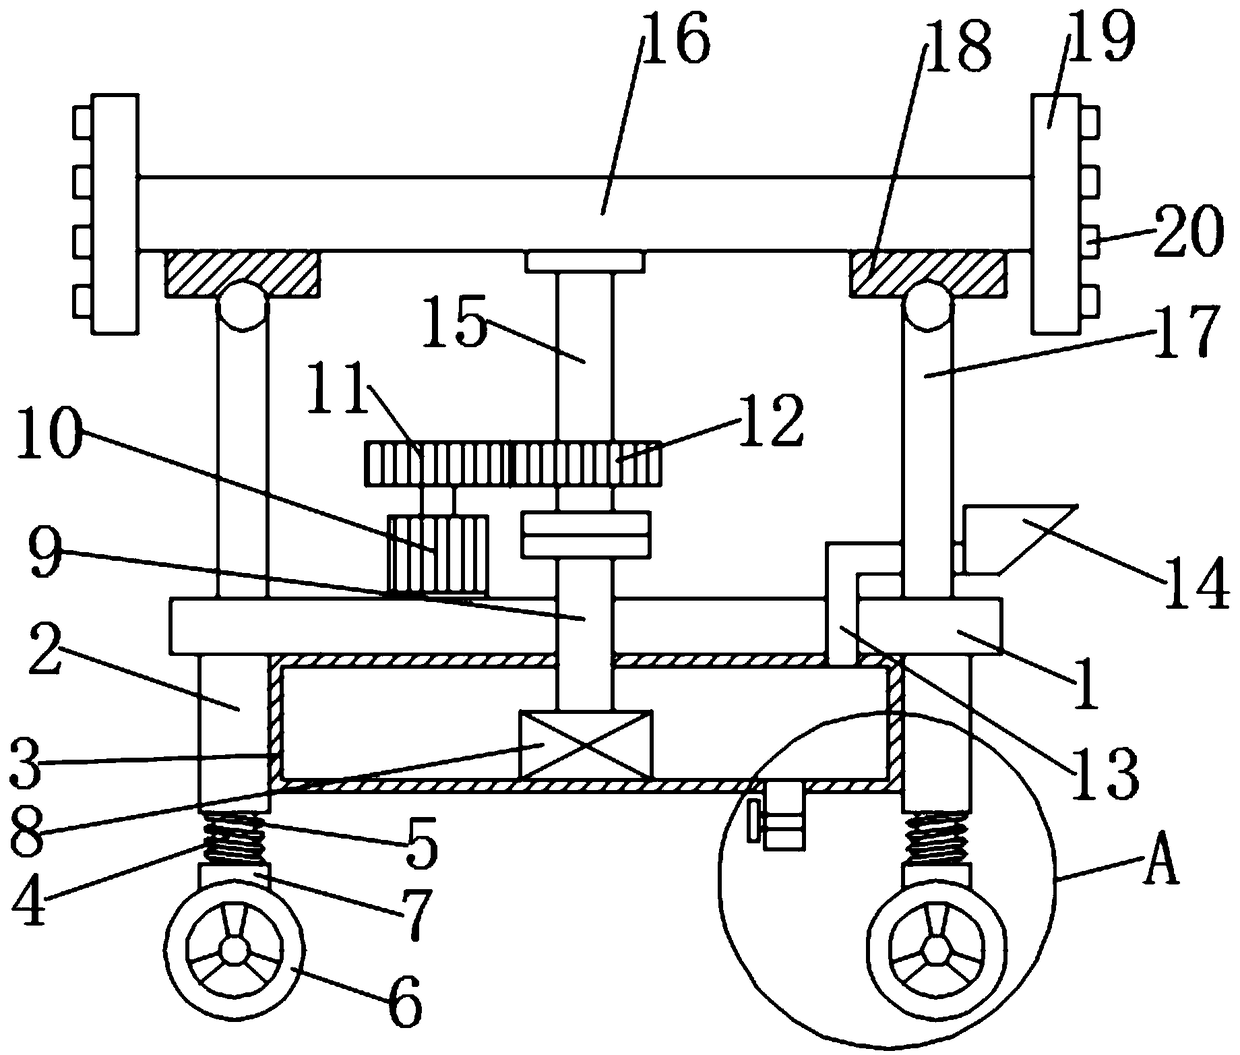 Agricultural irrigation device capable of achieving rotary irrigation